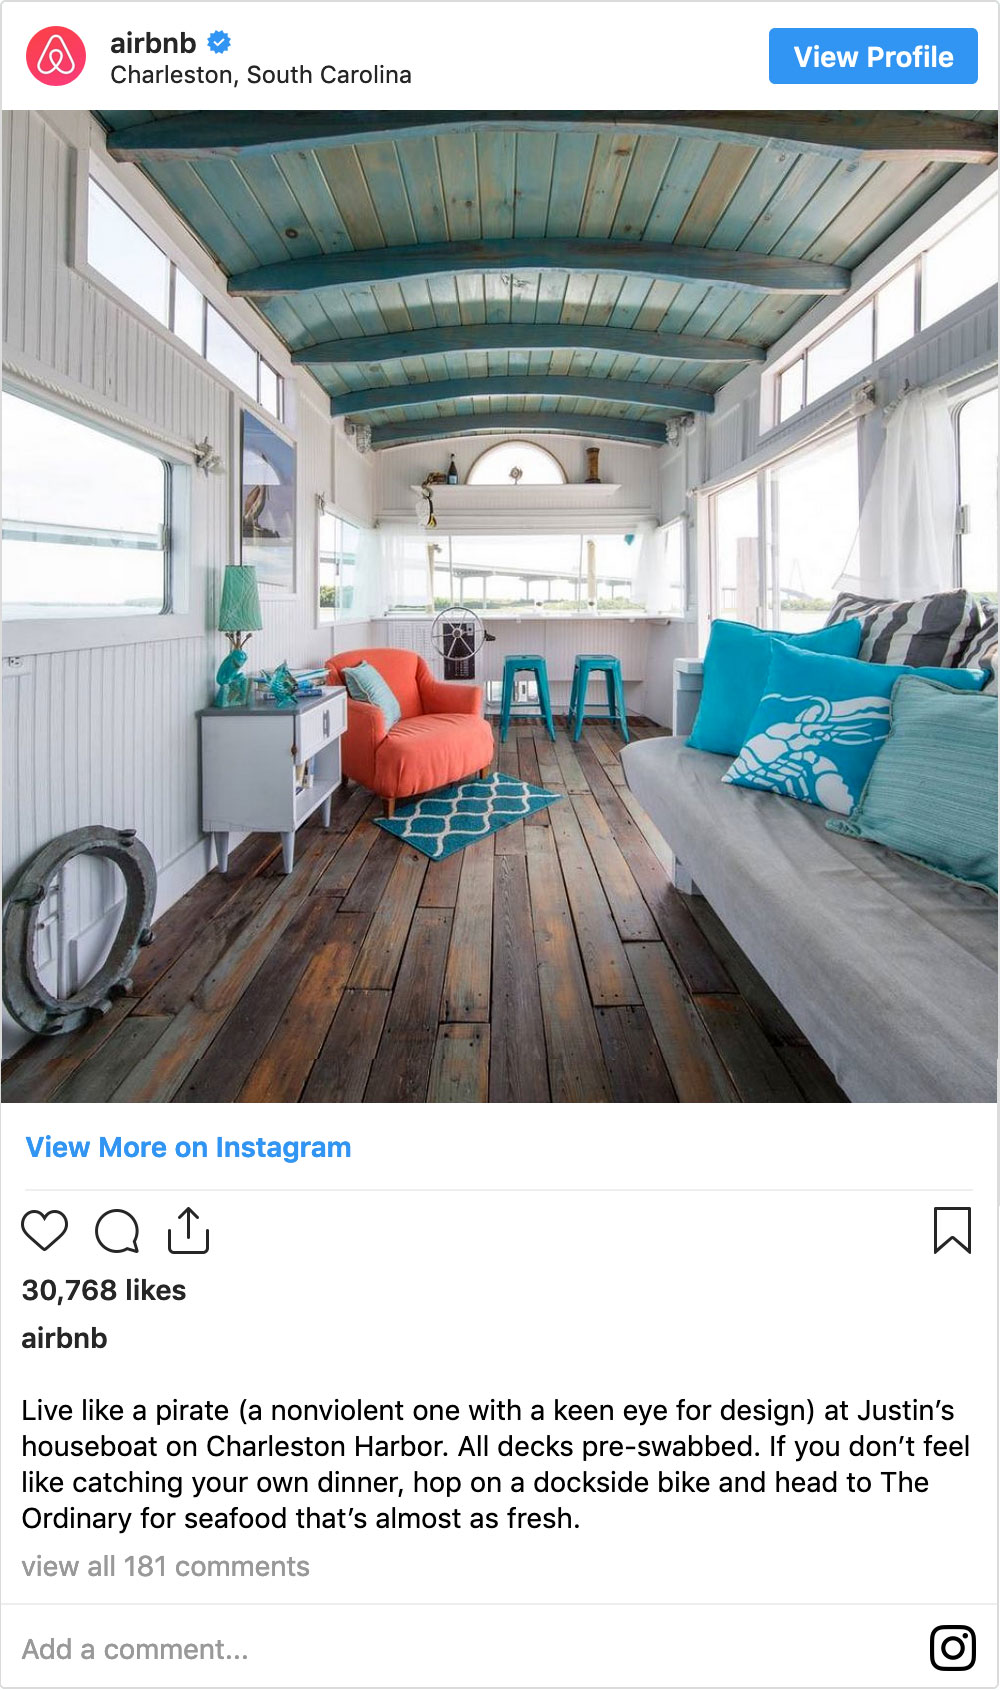 How airbnb do content marketing.